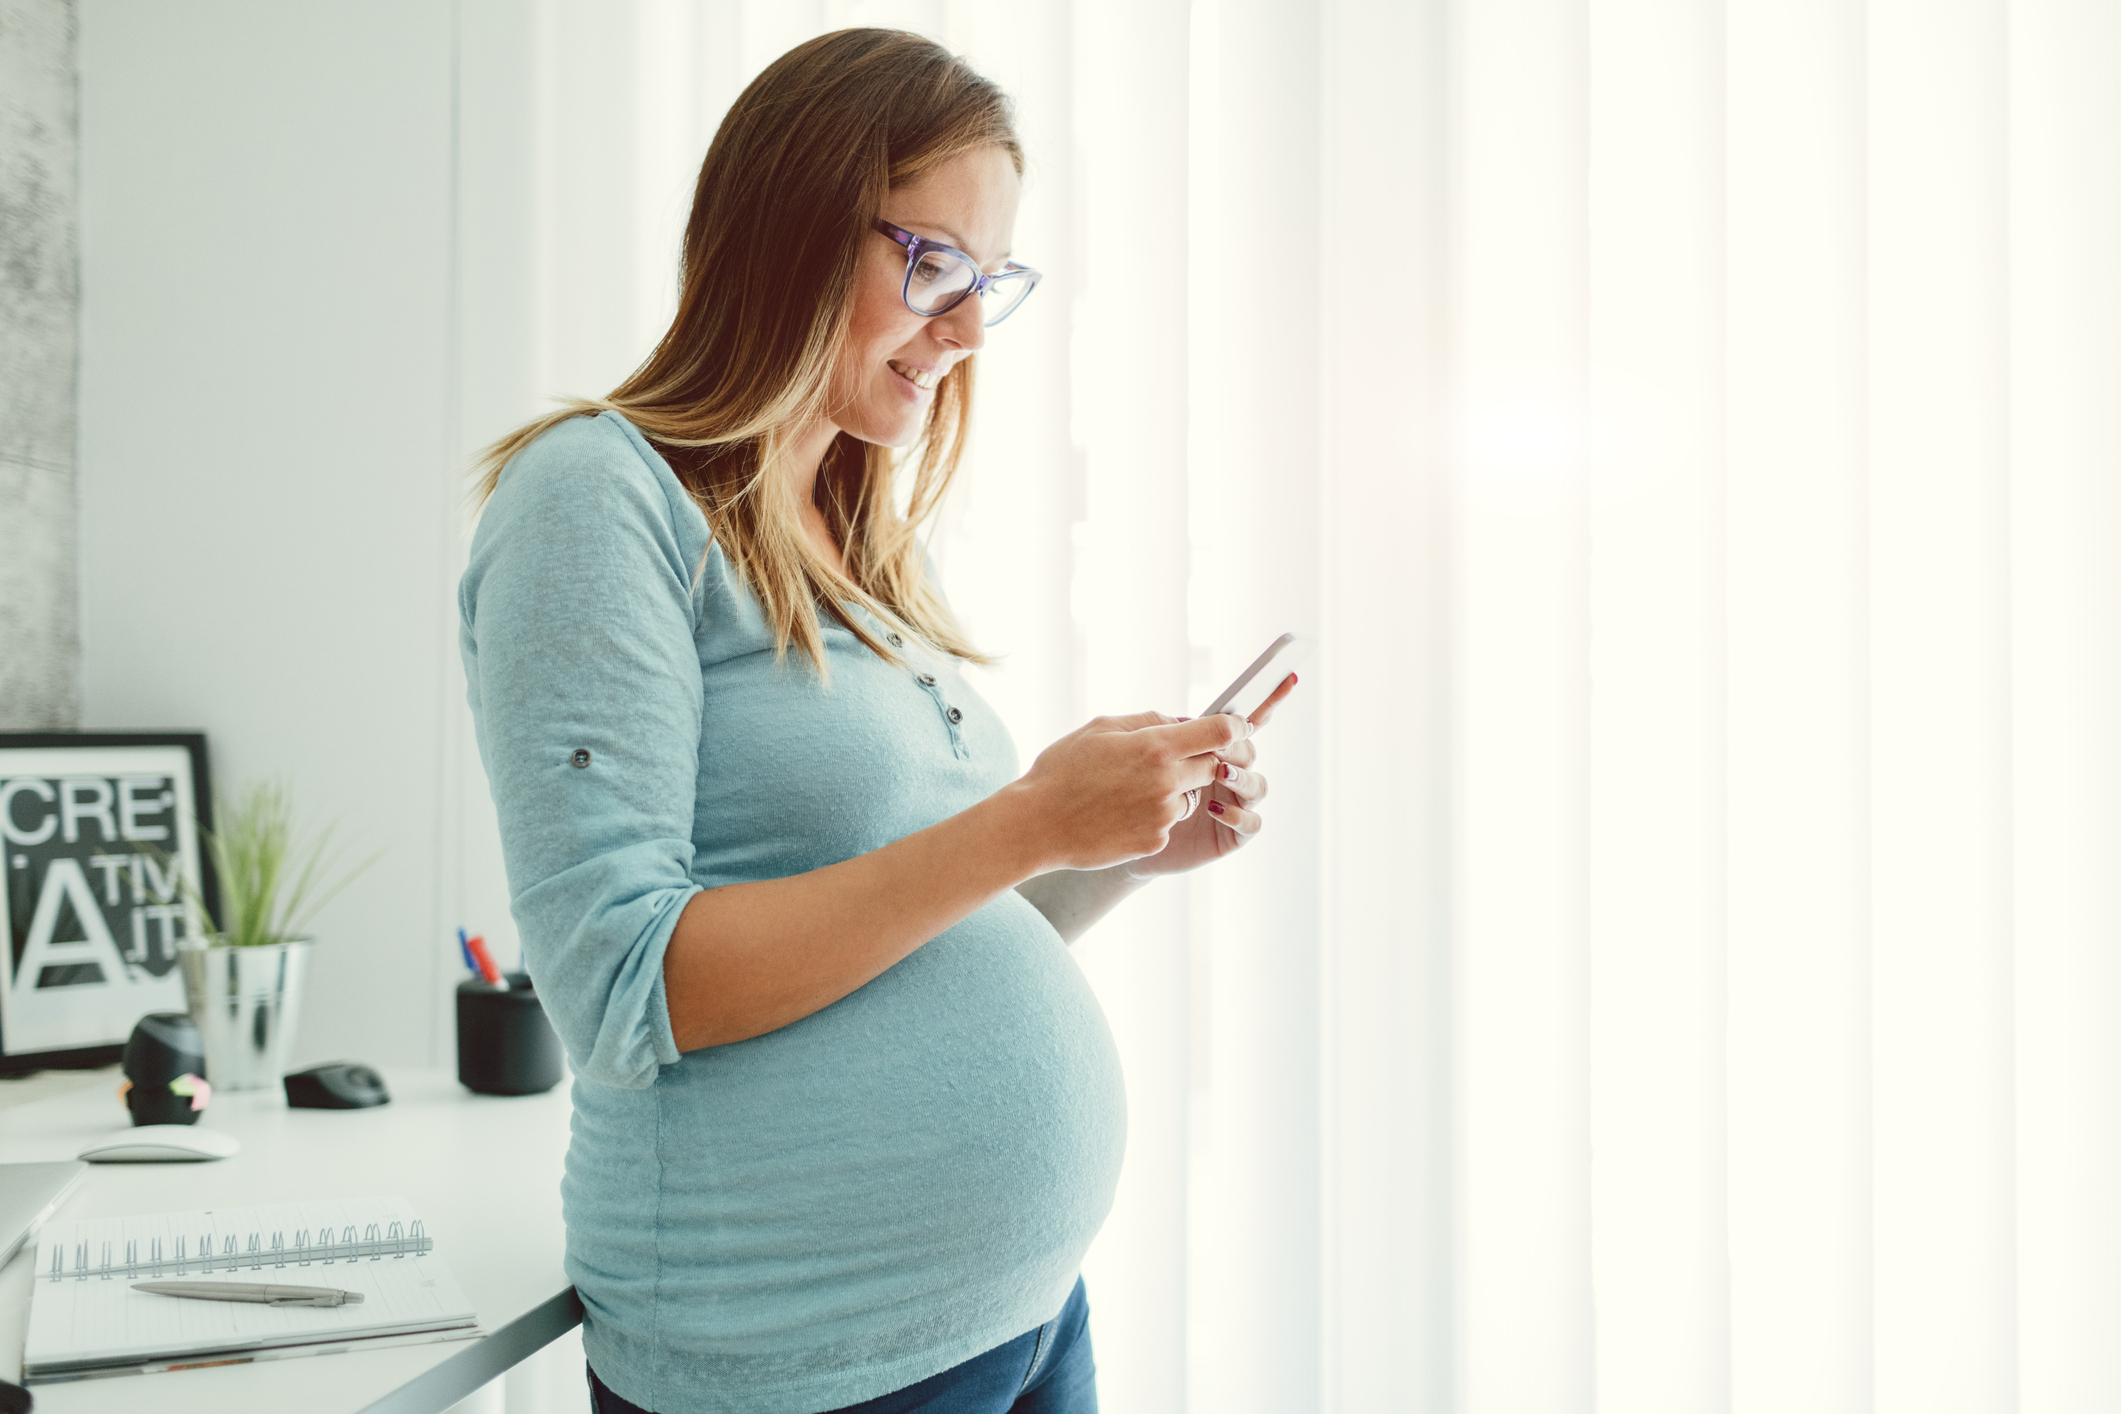 A smiling pregnant woman looks at her smart phone